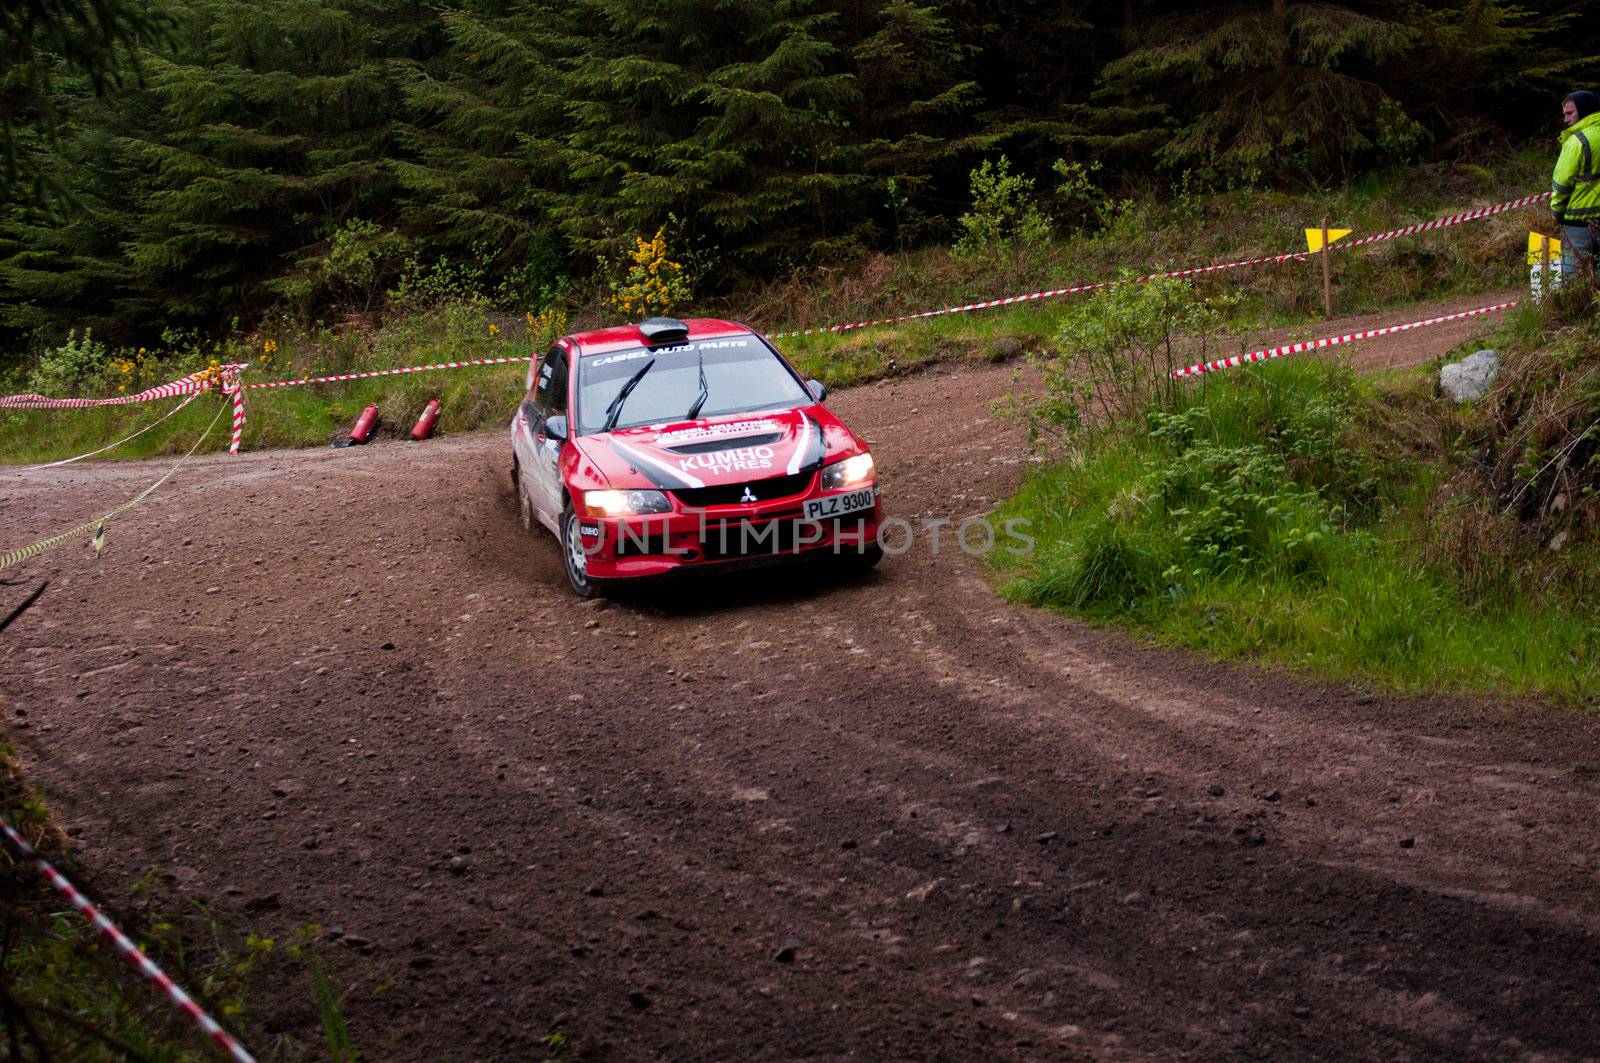 P. O' Connell driving Mitsubishi Evo by luissantos84